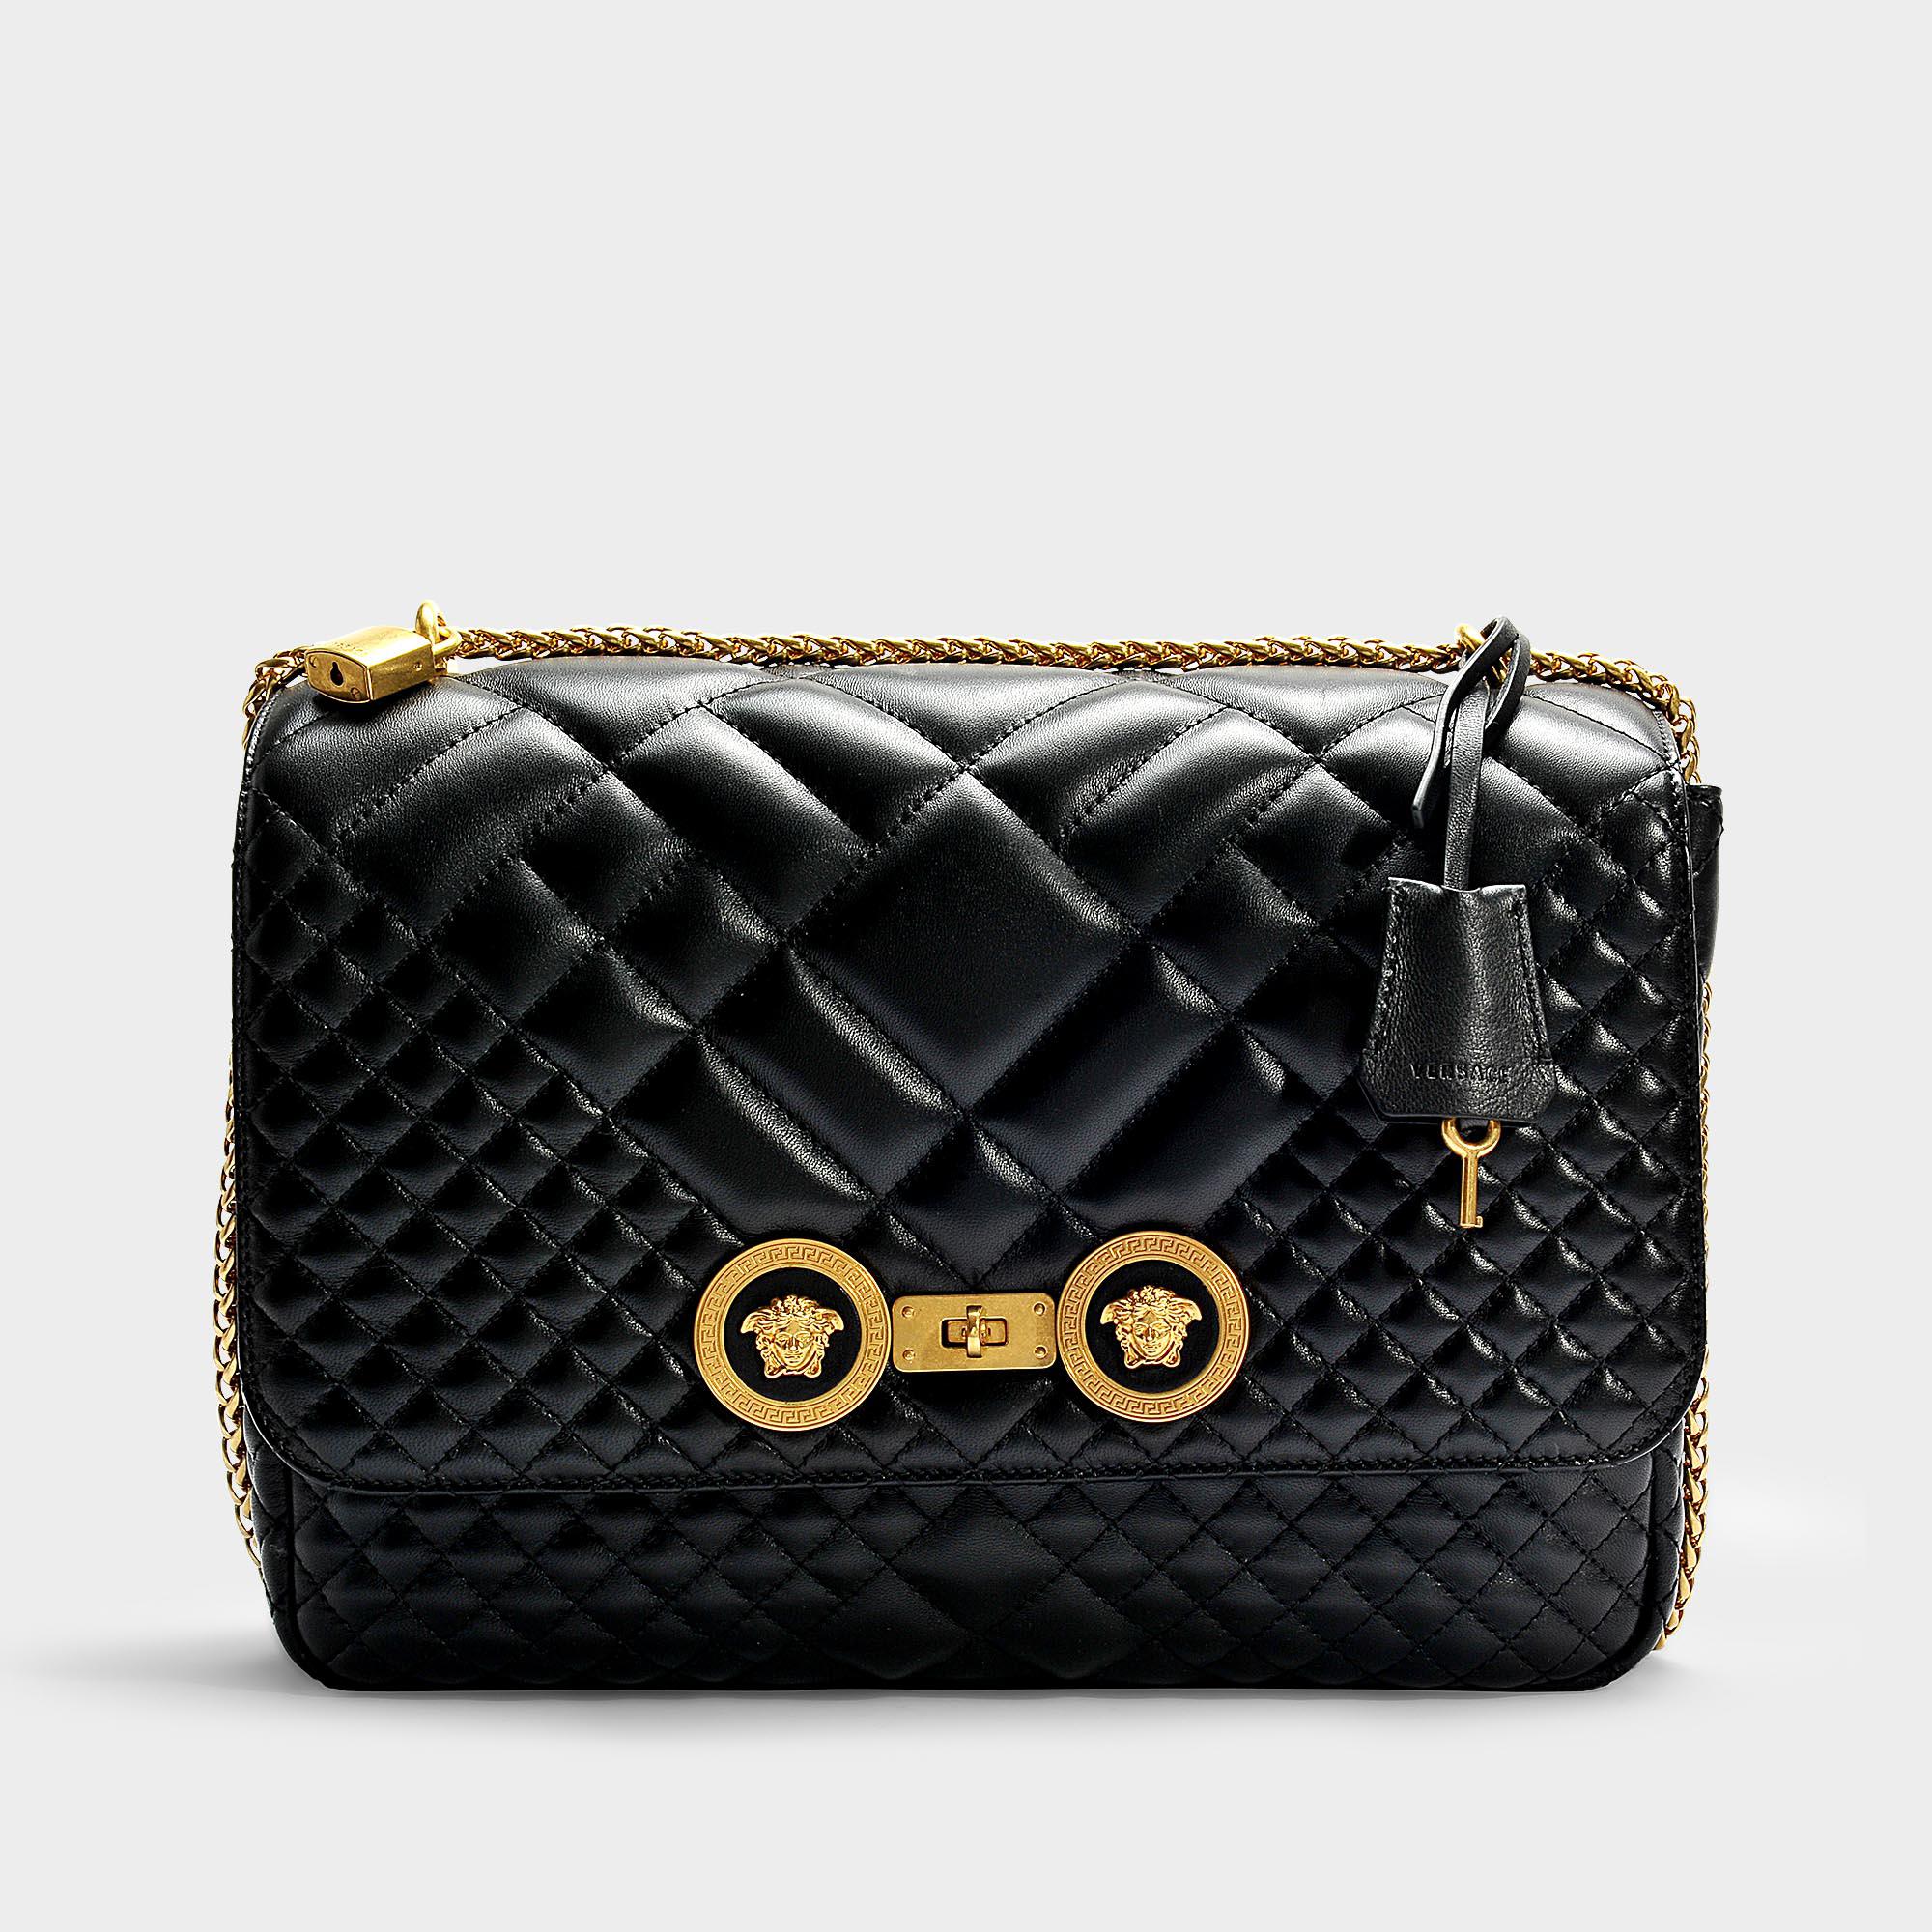 Versace Purse Strapping | IQS Executive